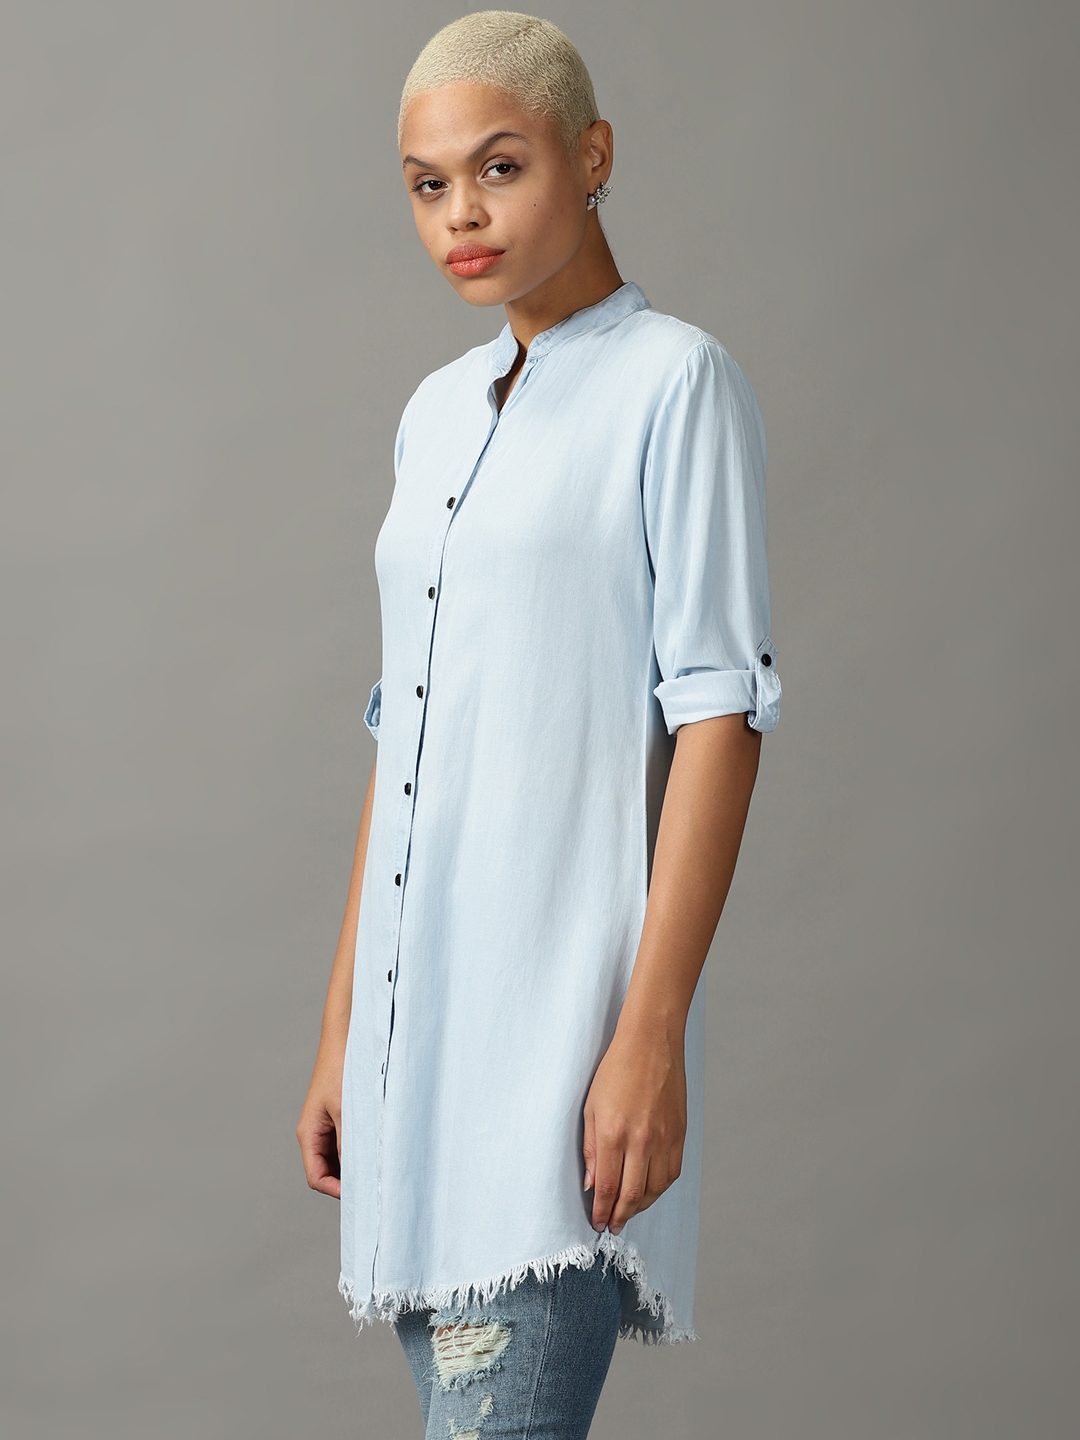 Women's Blue Cotton Solid Casual Shirts